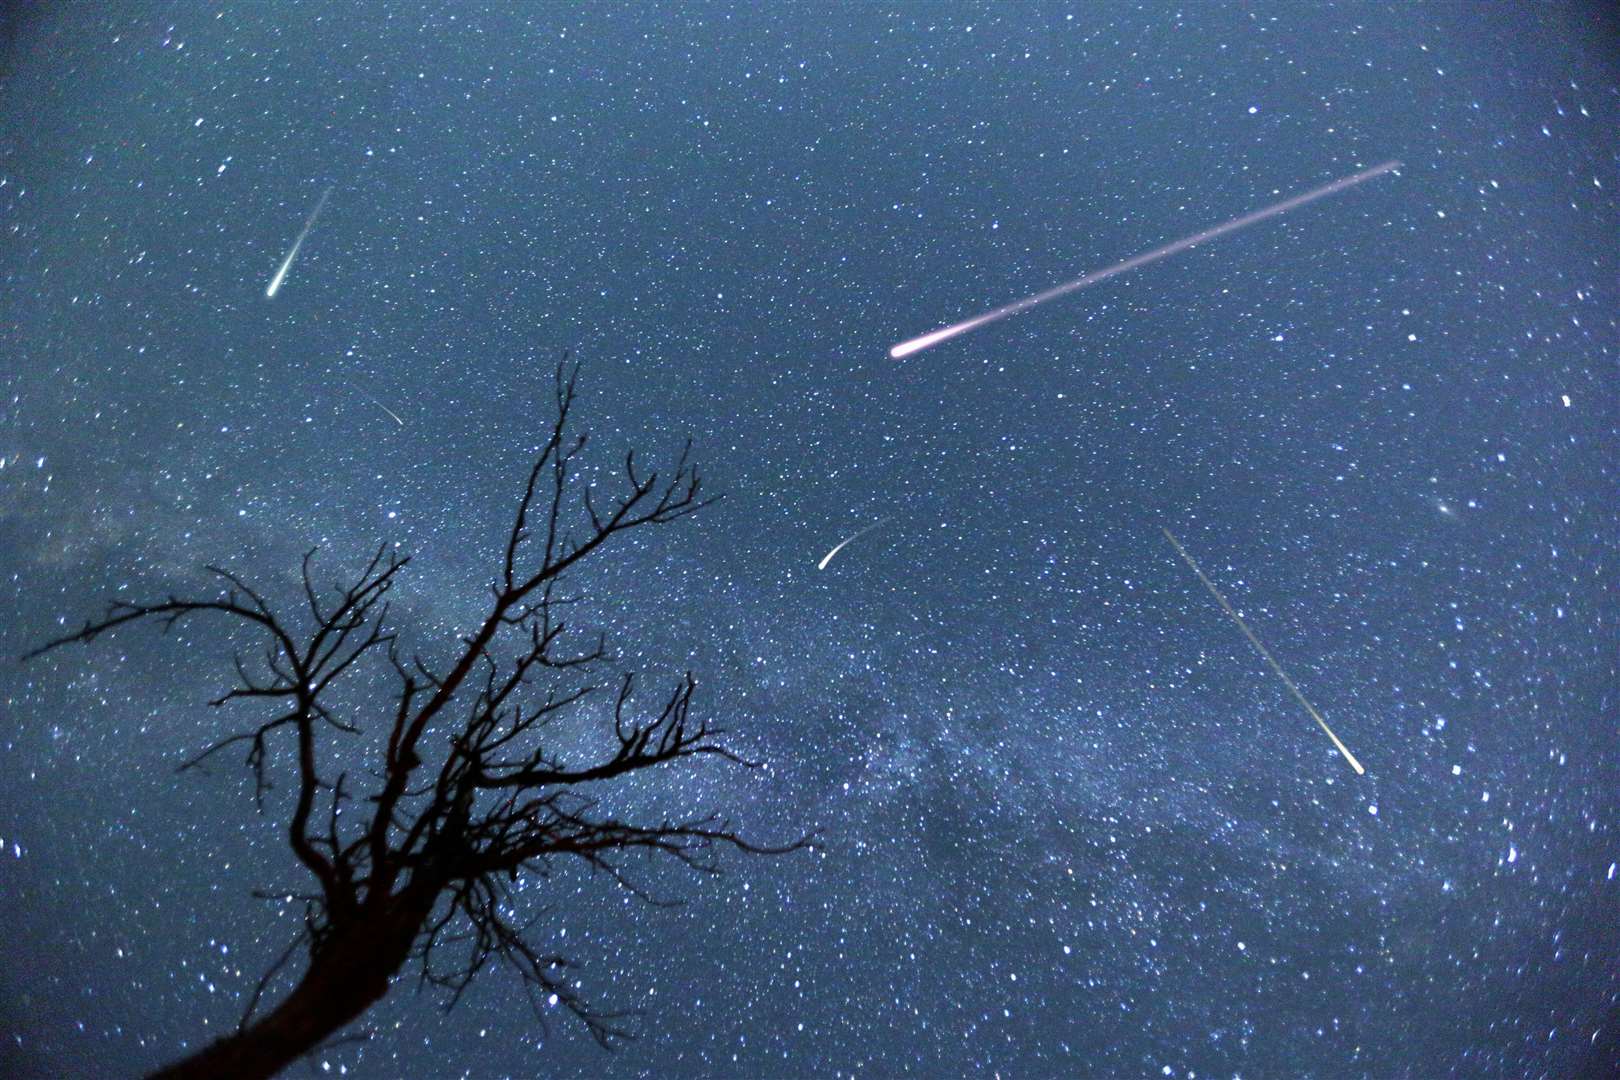 The meteor shower will peak between December 14 and 15. Image: Adobe stock photo.